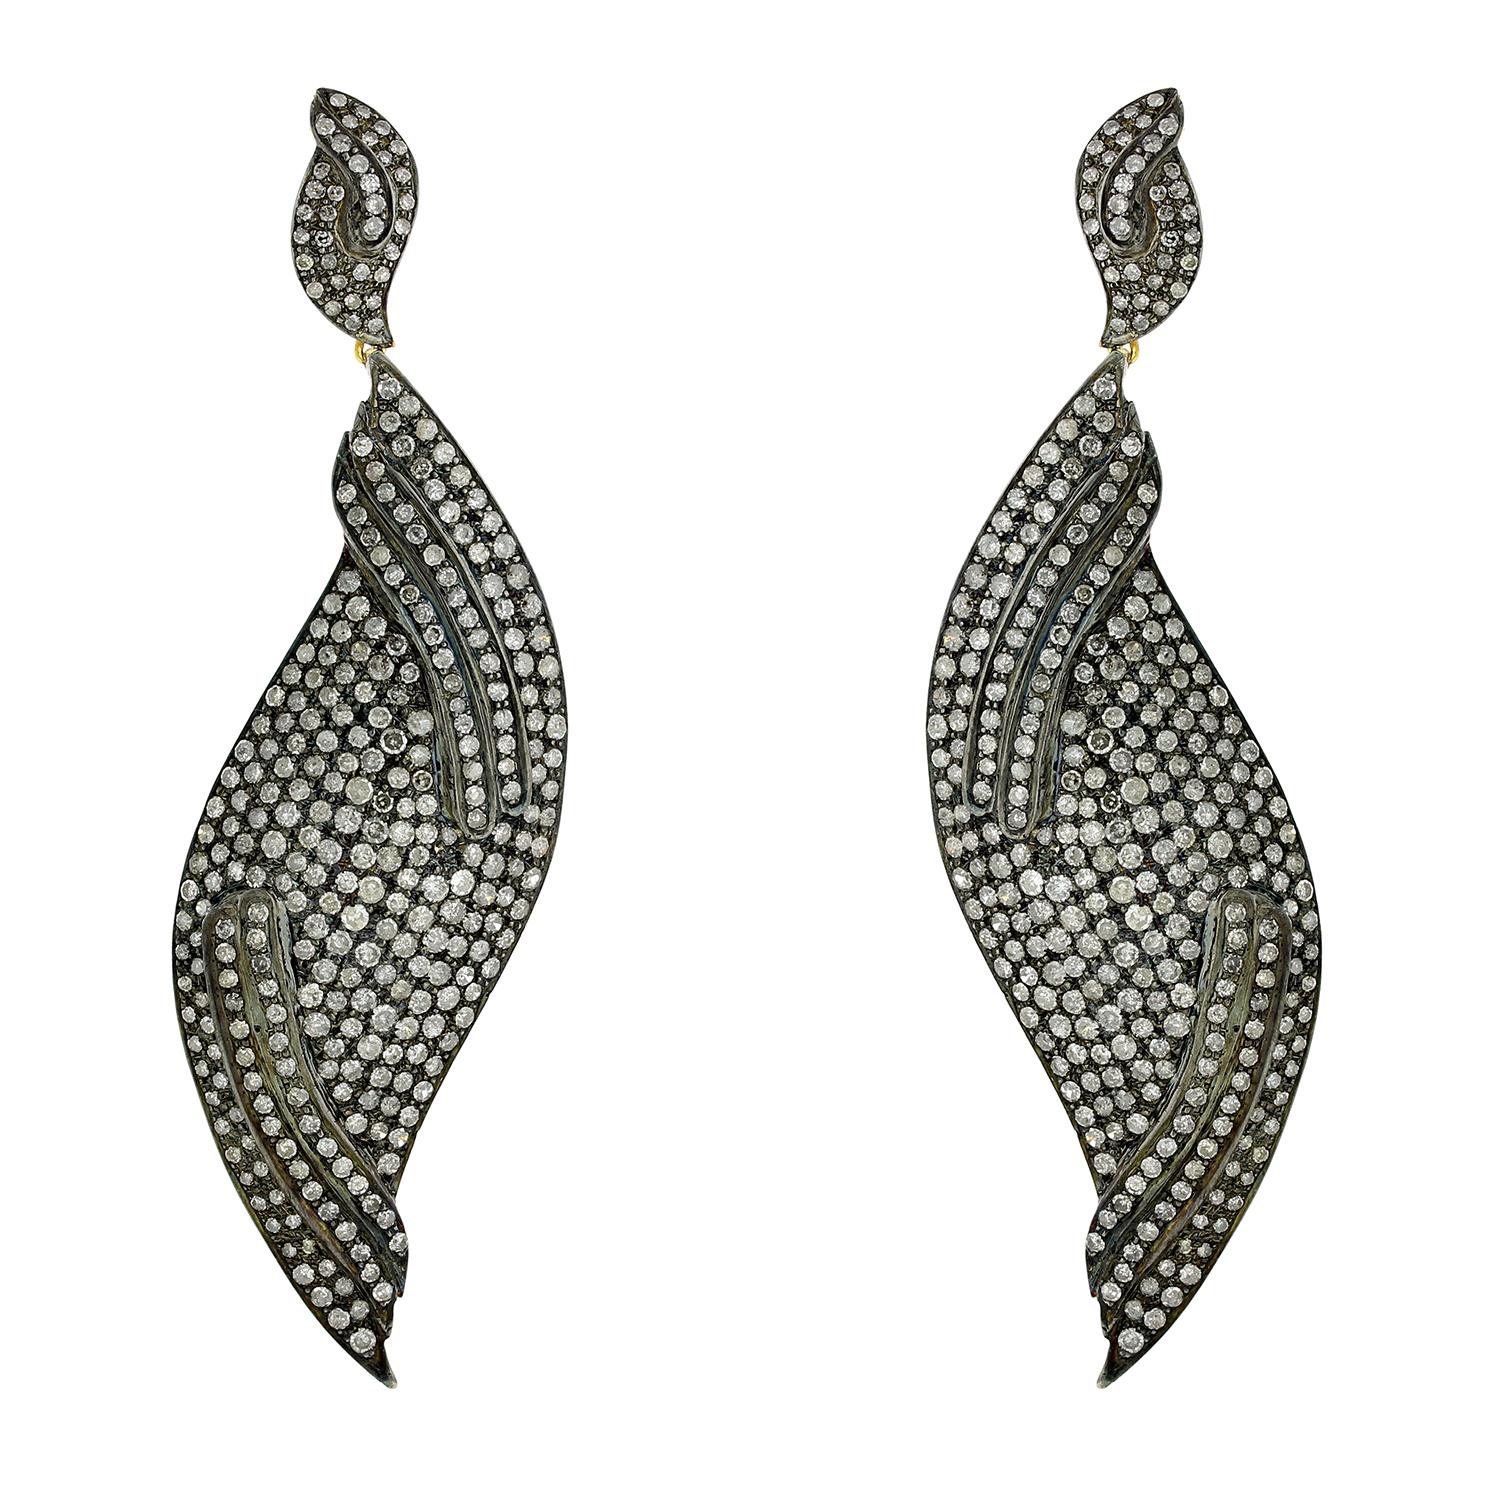 Feather Shaped Earrings with Pave Diamonds Made in 14k Yellow Gold & Silver